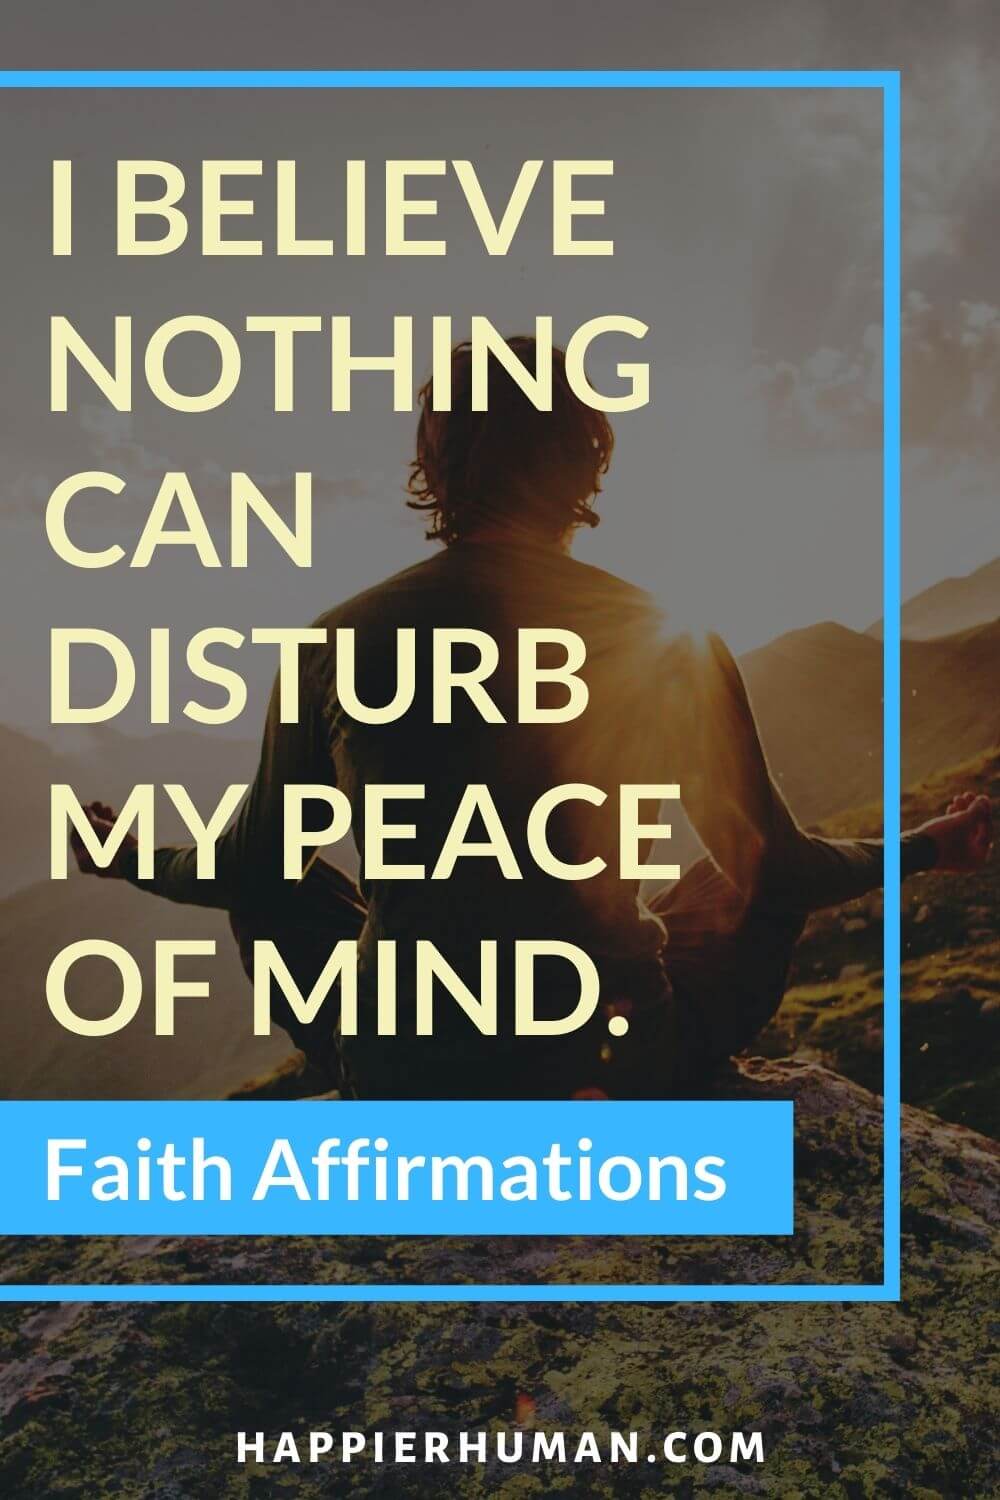 Affirmations for Faith - I believe nothing can disturb my peace of mind. | positive affirmations for faith | meaning of daily affirmations | affirmation of faith meaning